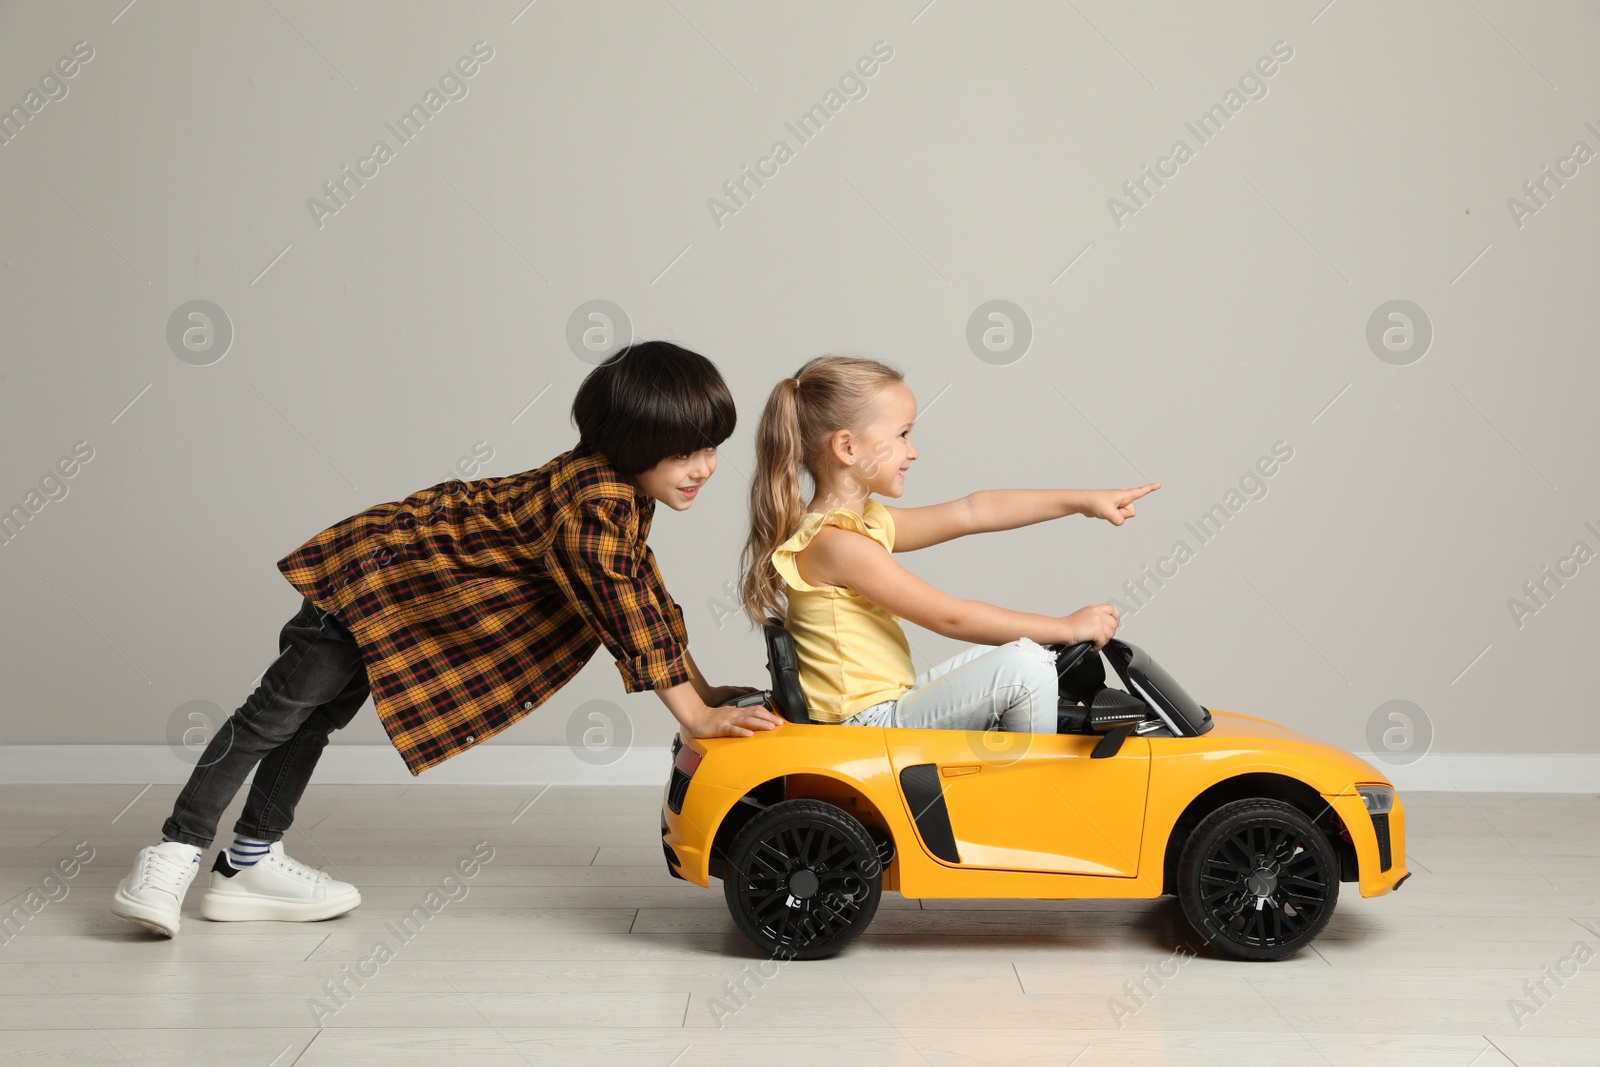 Photo of Cute boy pushing children's electric toy car with little girl near grey wall indoors